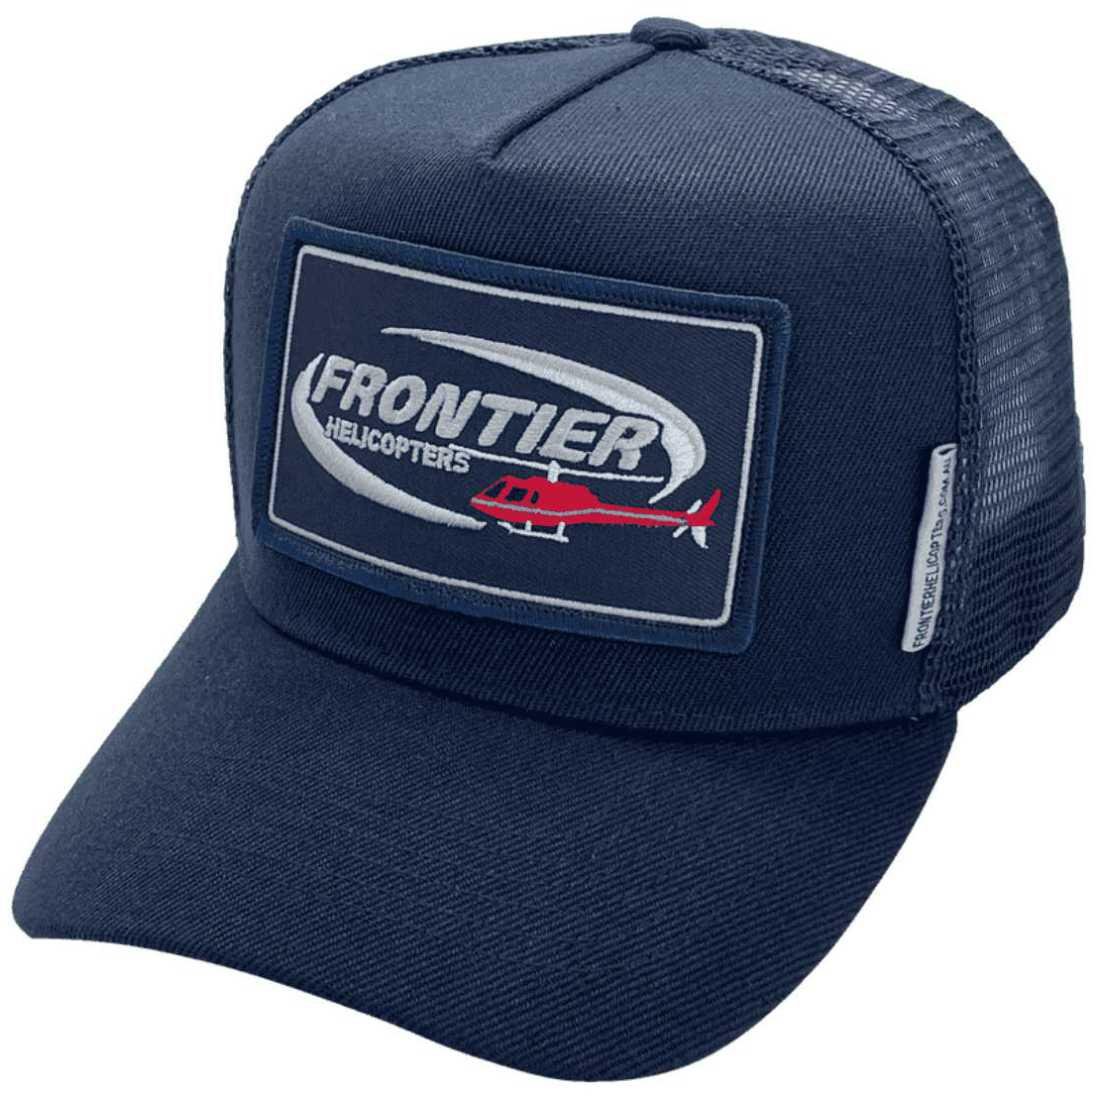 Frontier Helicopters - Basic Aussie Trucker Hats HP Navy